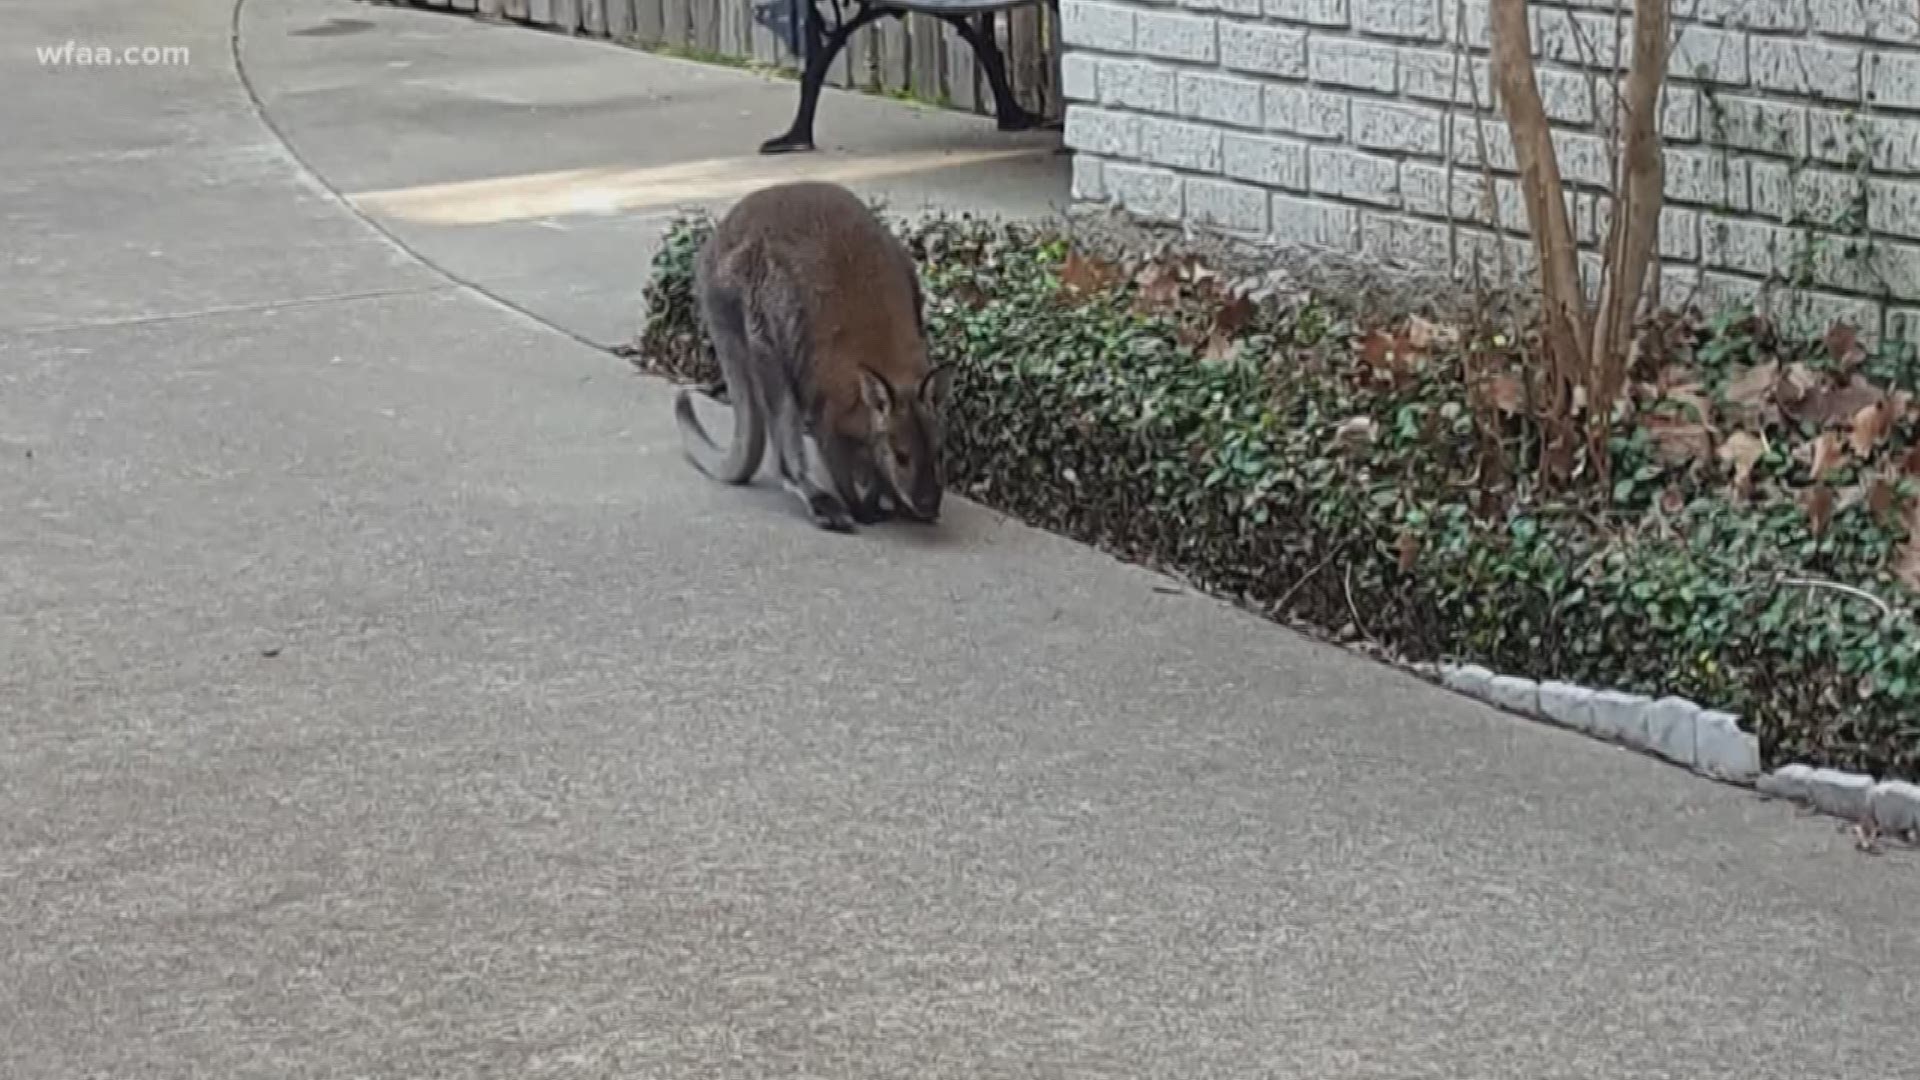 The wallaby, which evidently escaped from its owner through a fence, was seen hopping through the Lakewood area Wednesday morning.